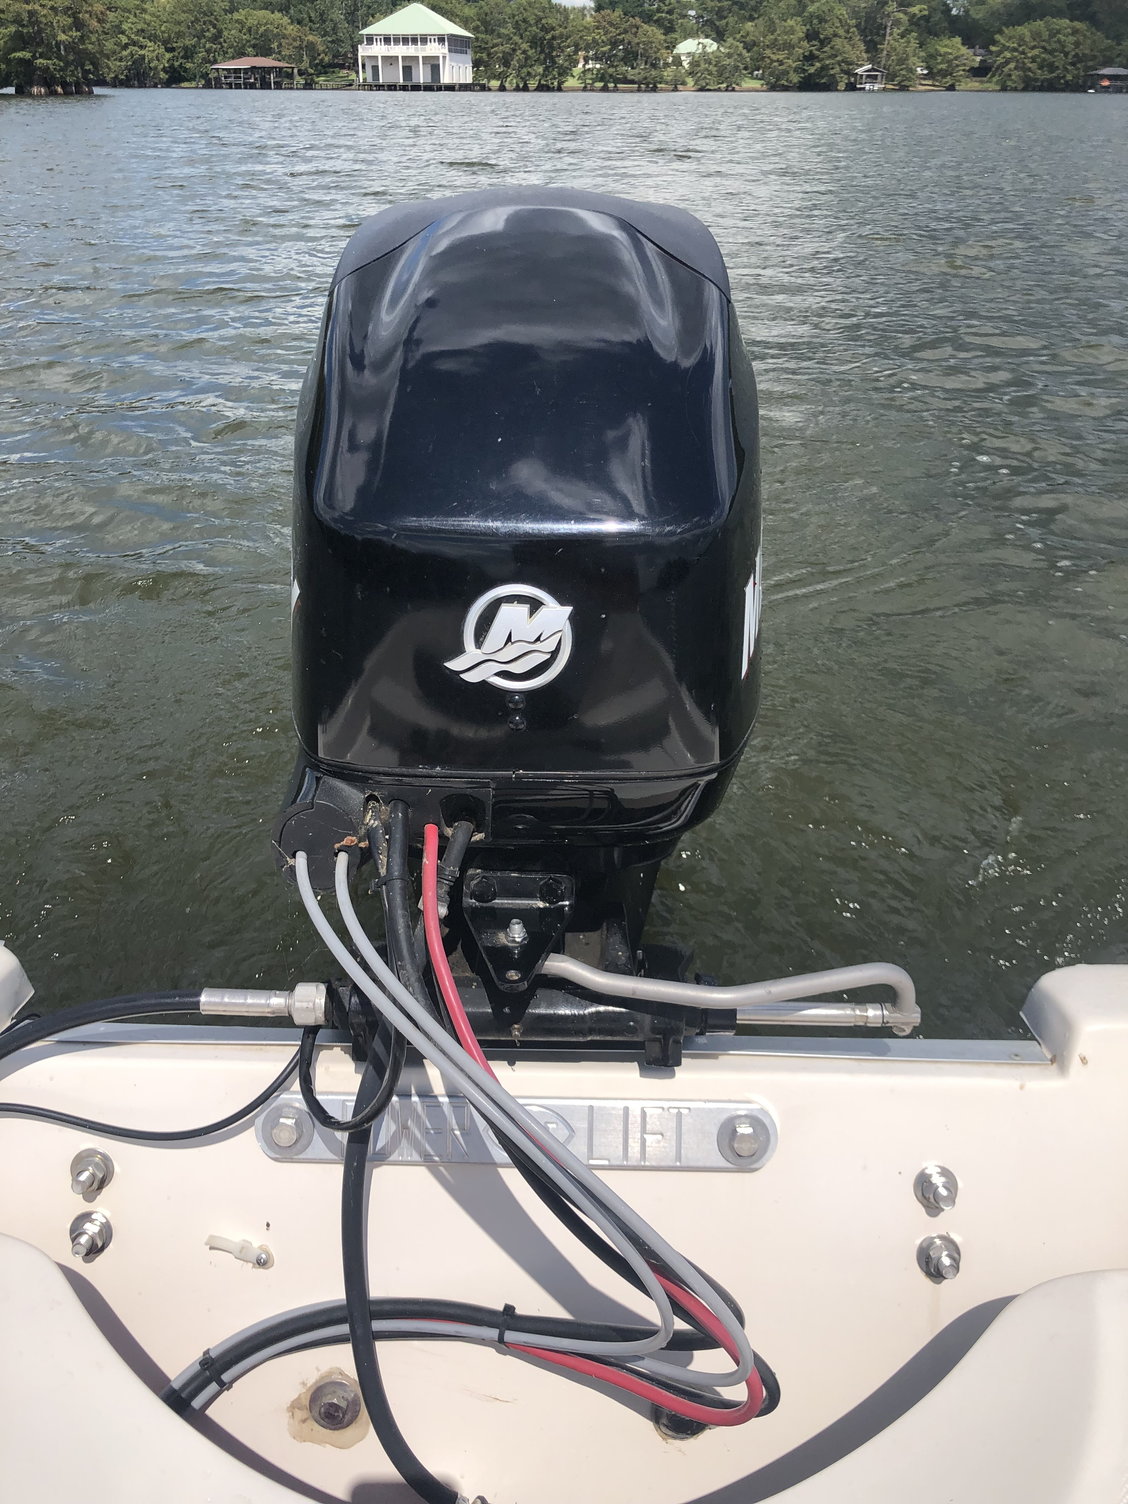 Keeping outboard still trailering - The Hull Truth - Boating and